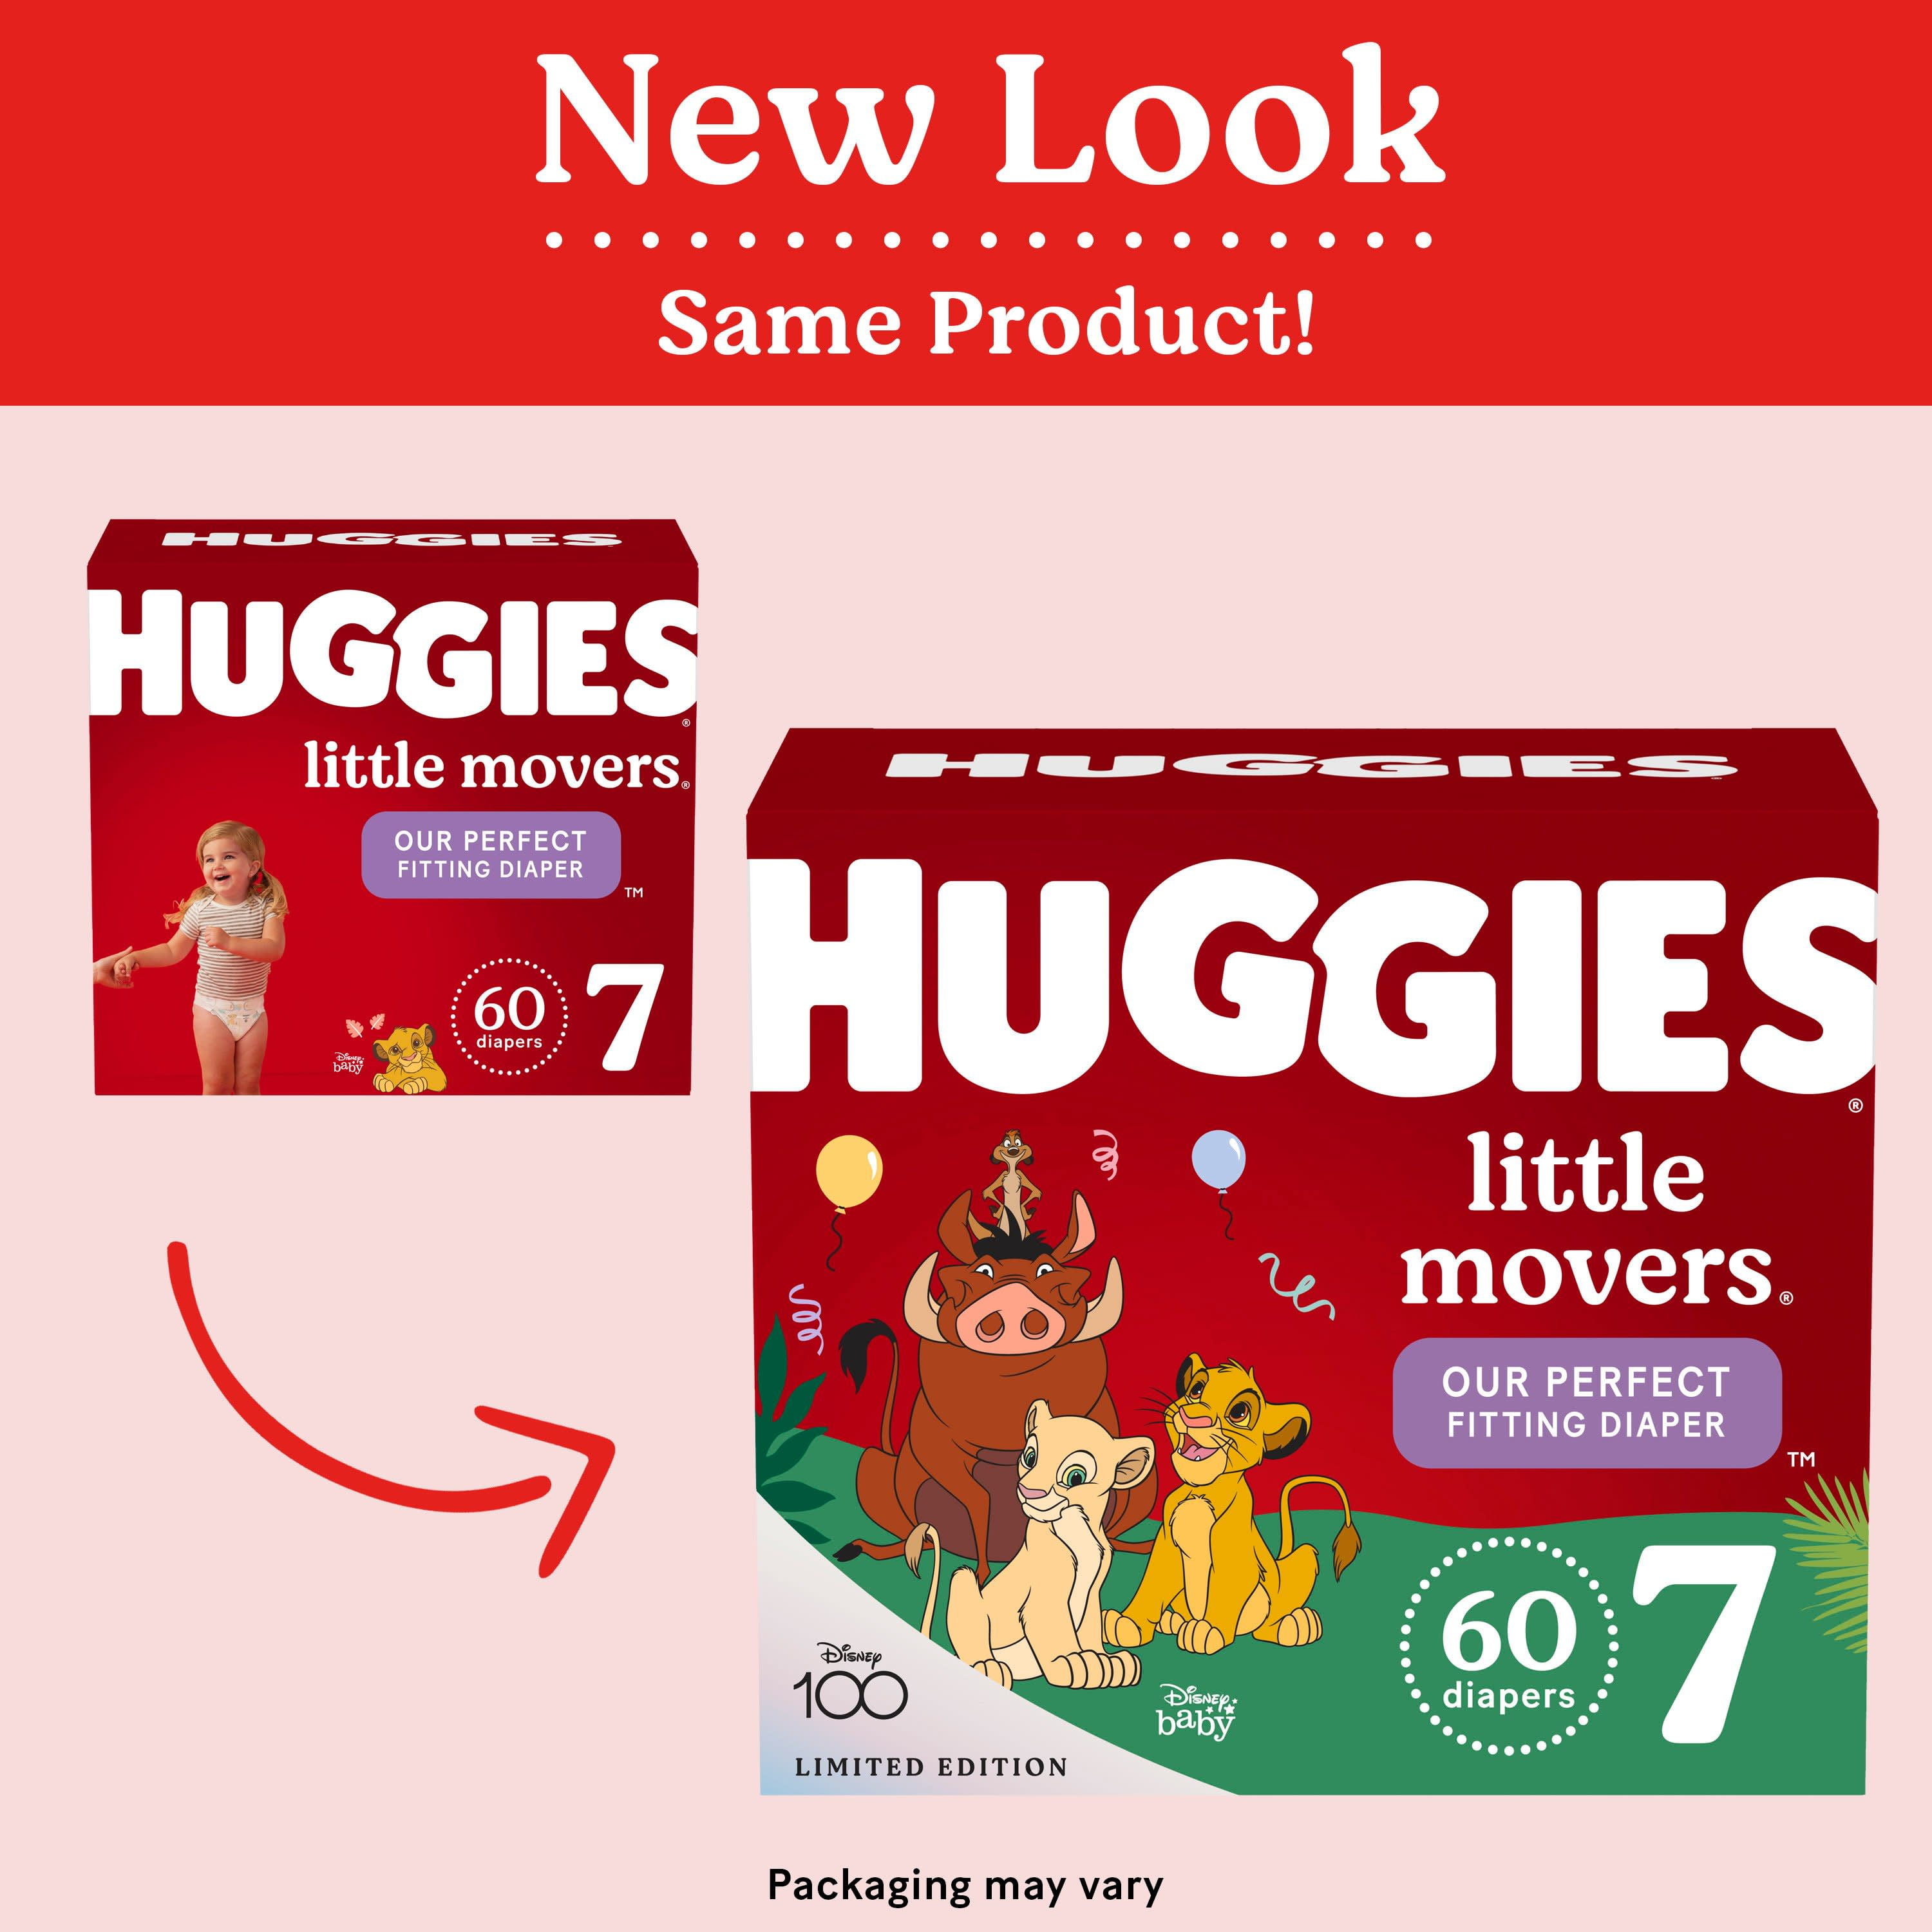  Huggies Size 7 Diapers, Little Movers Baby Diapers, Size 7 (41+  lbs), 80 Count : Baby